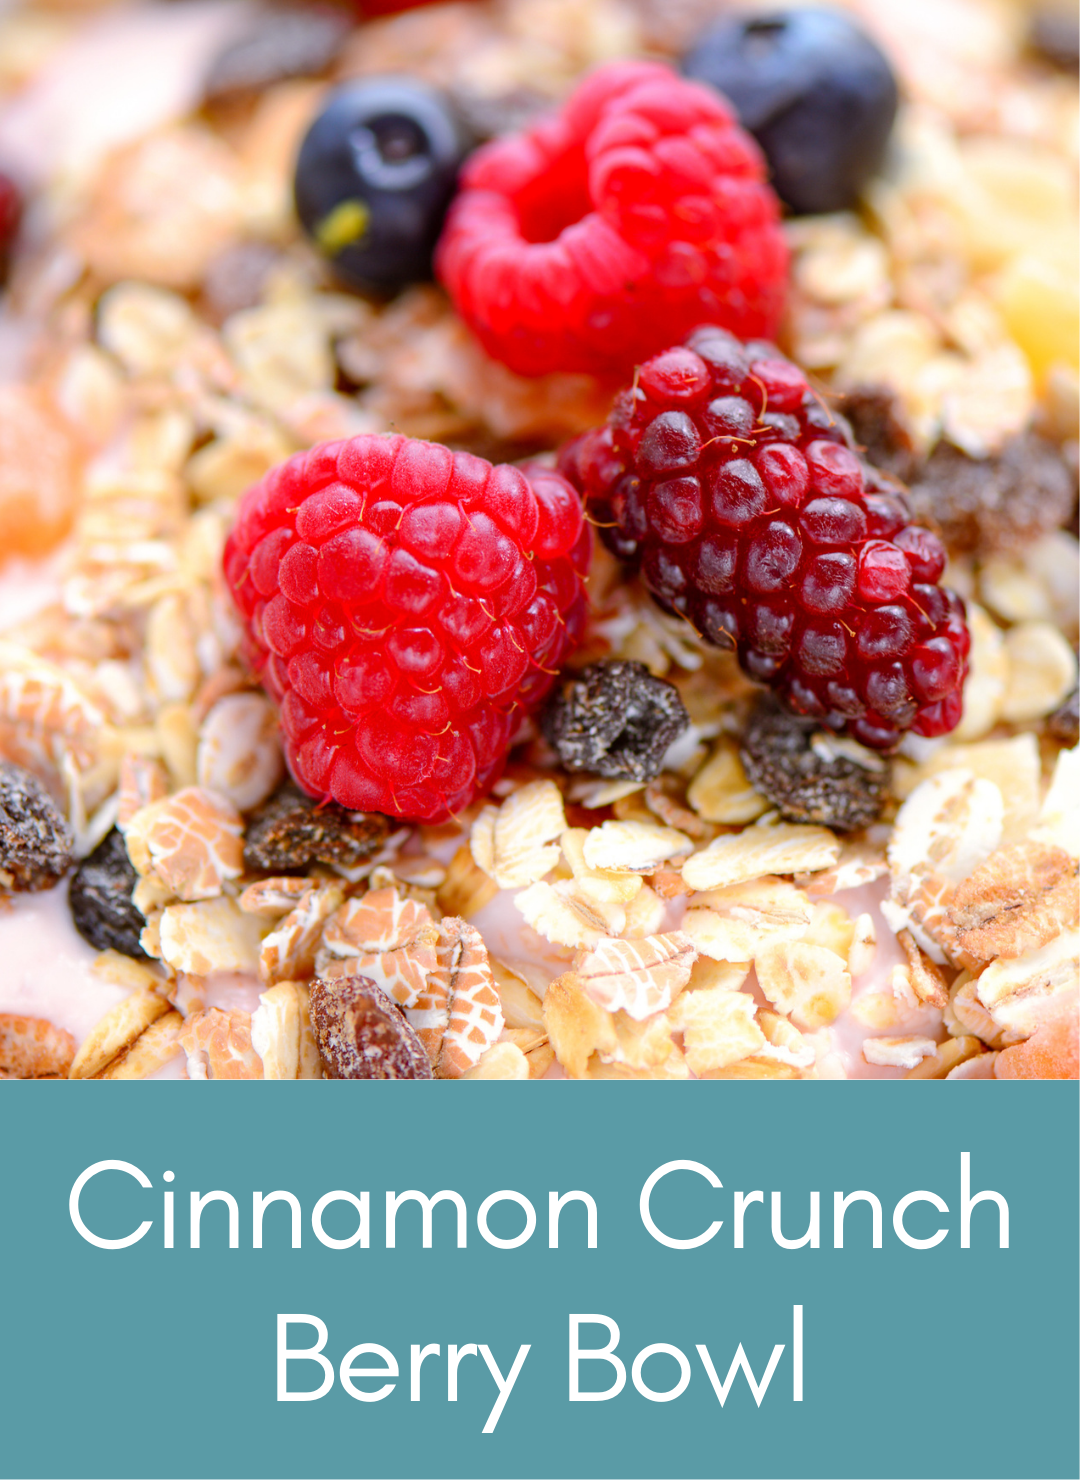 Cinnamon crunch berry breakfast bowl Picture with link to recipe